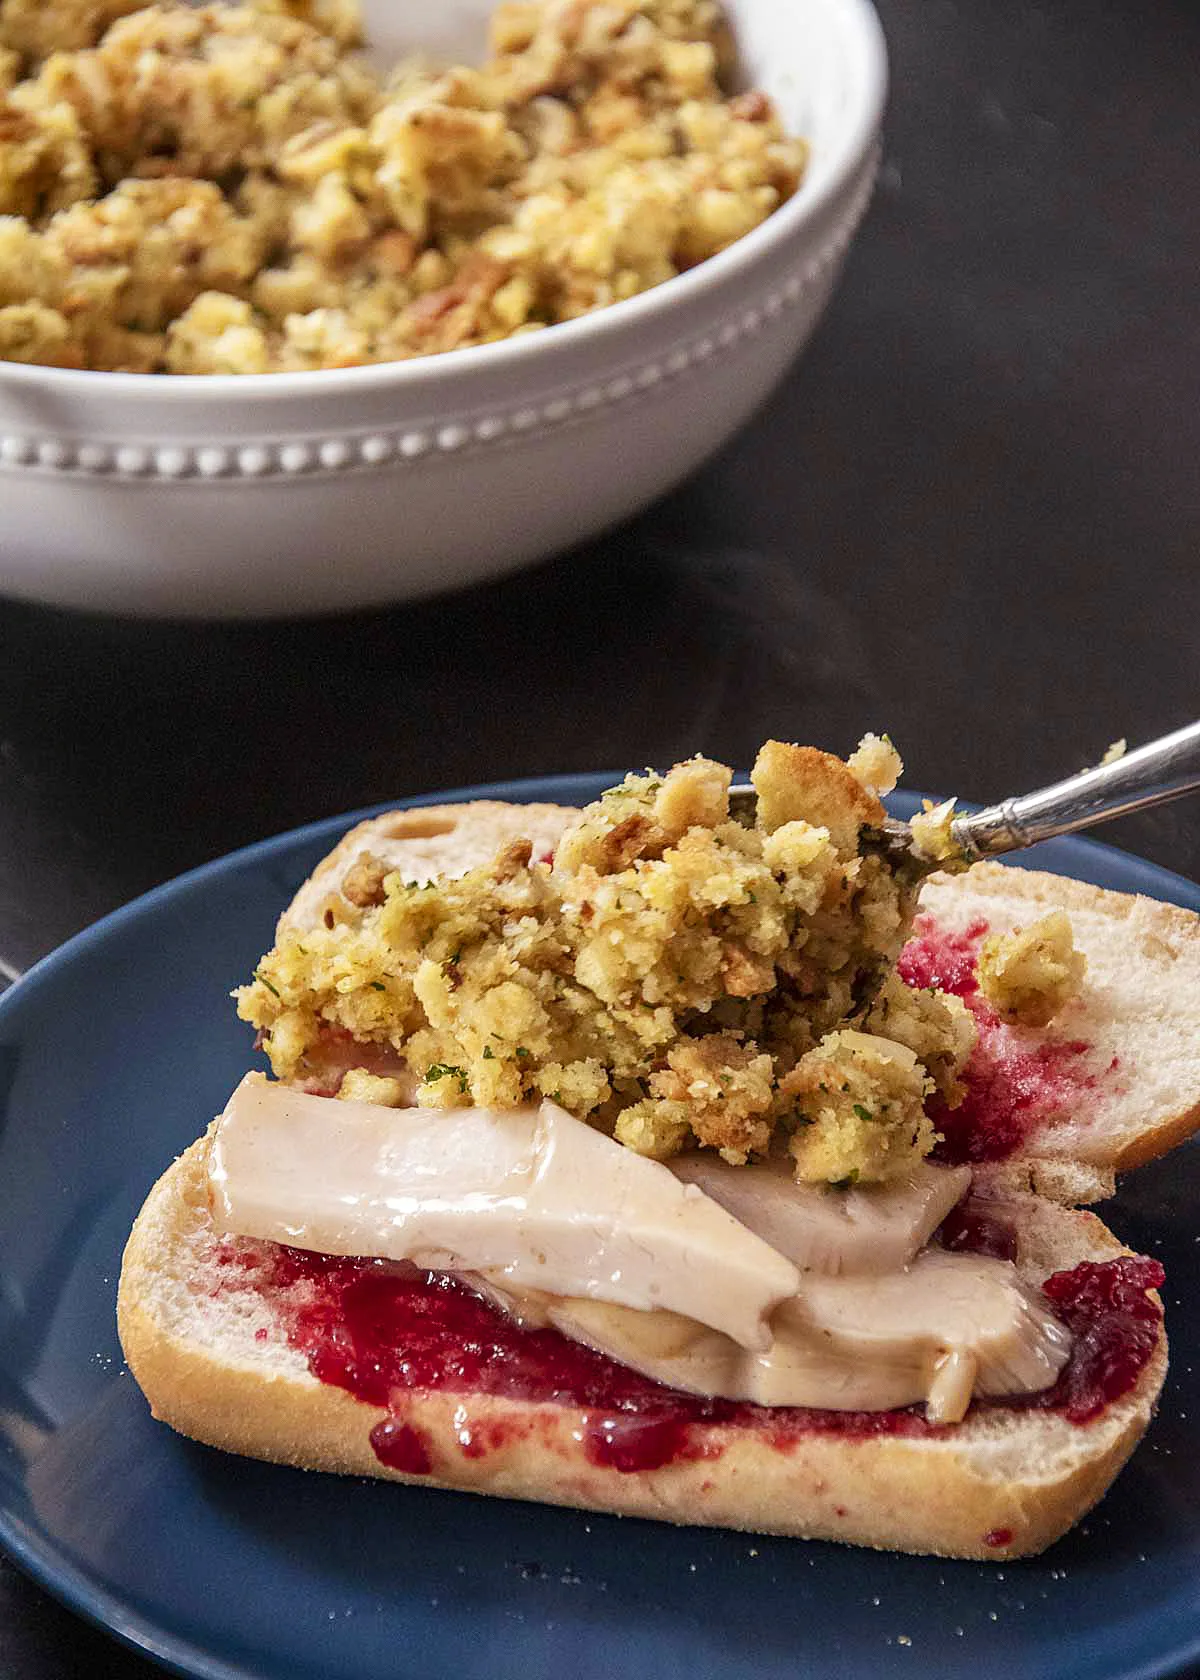 Adding stuffing to the Thanksgiving leftover sandwich.